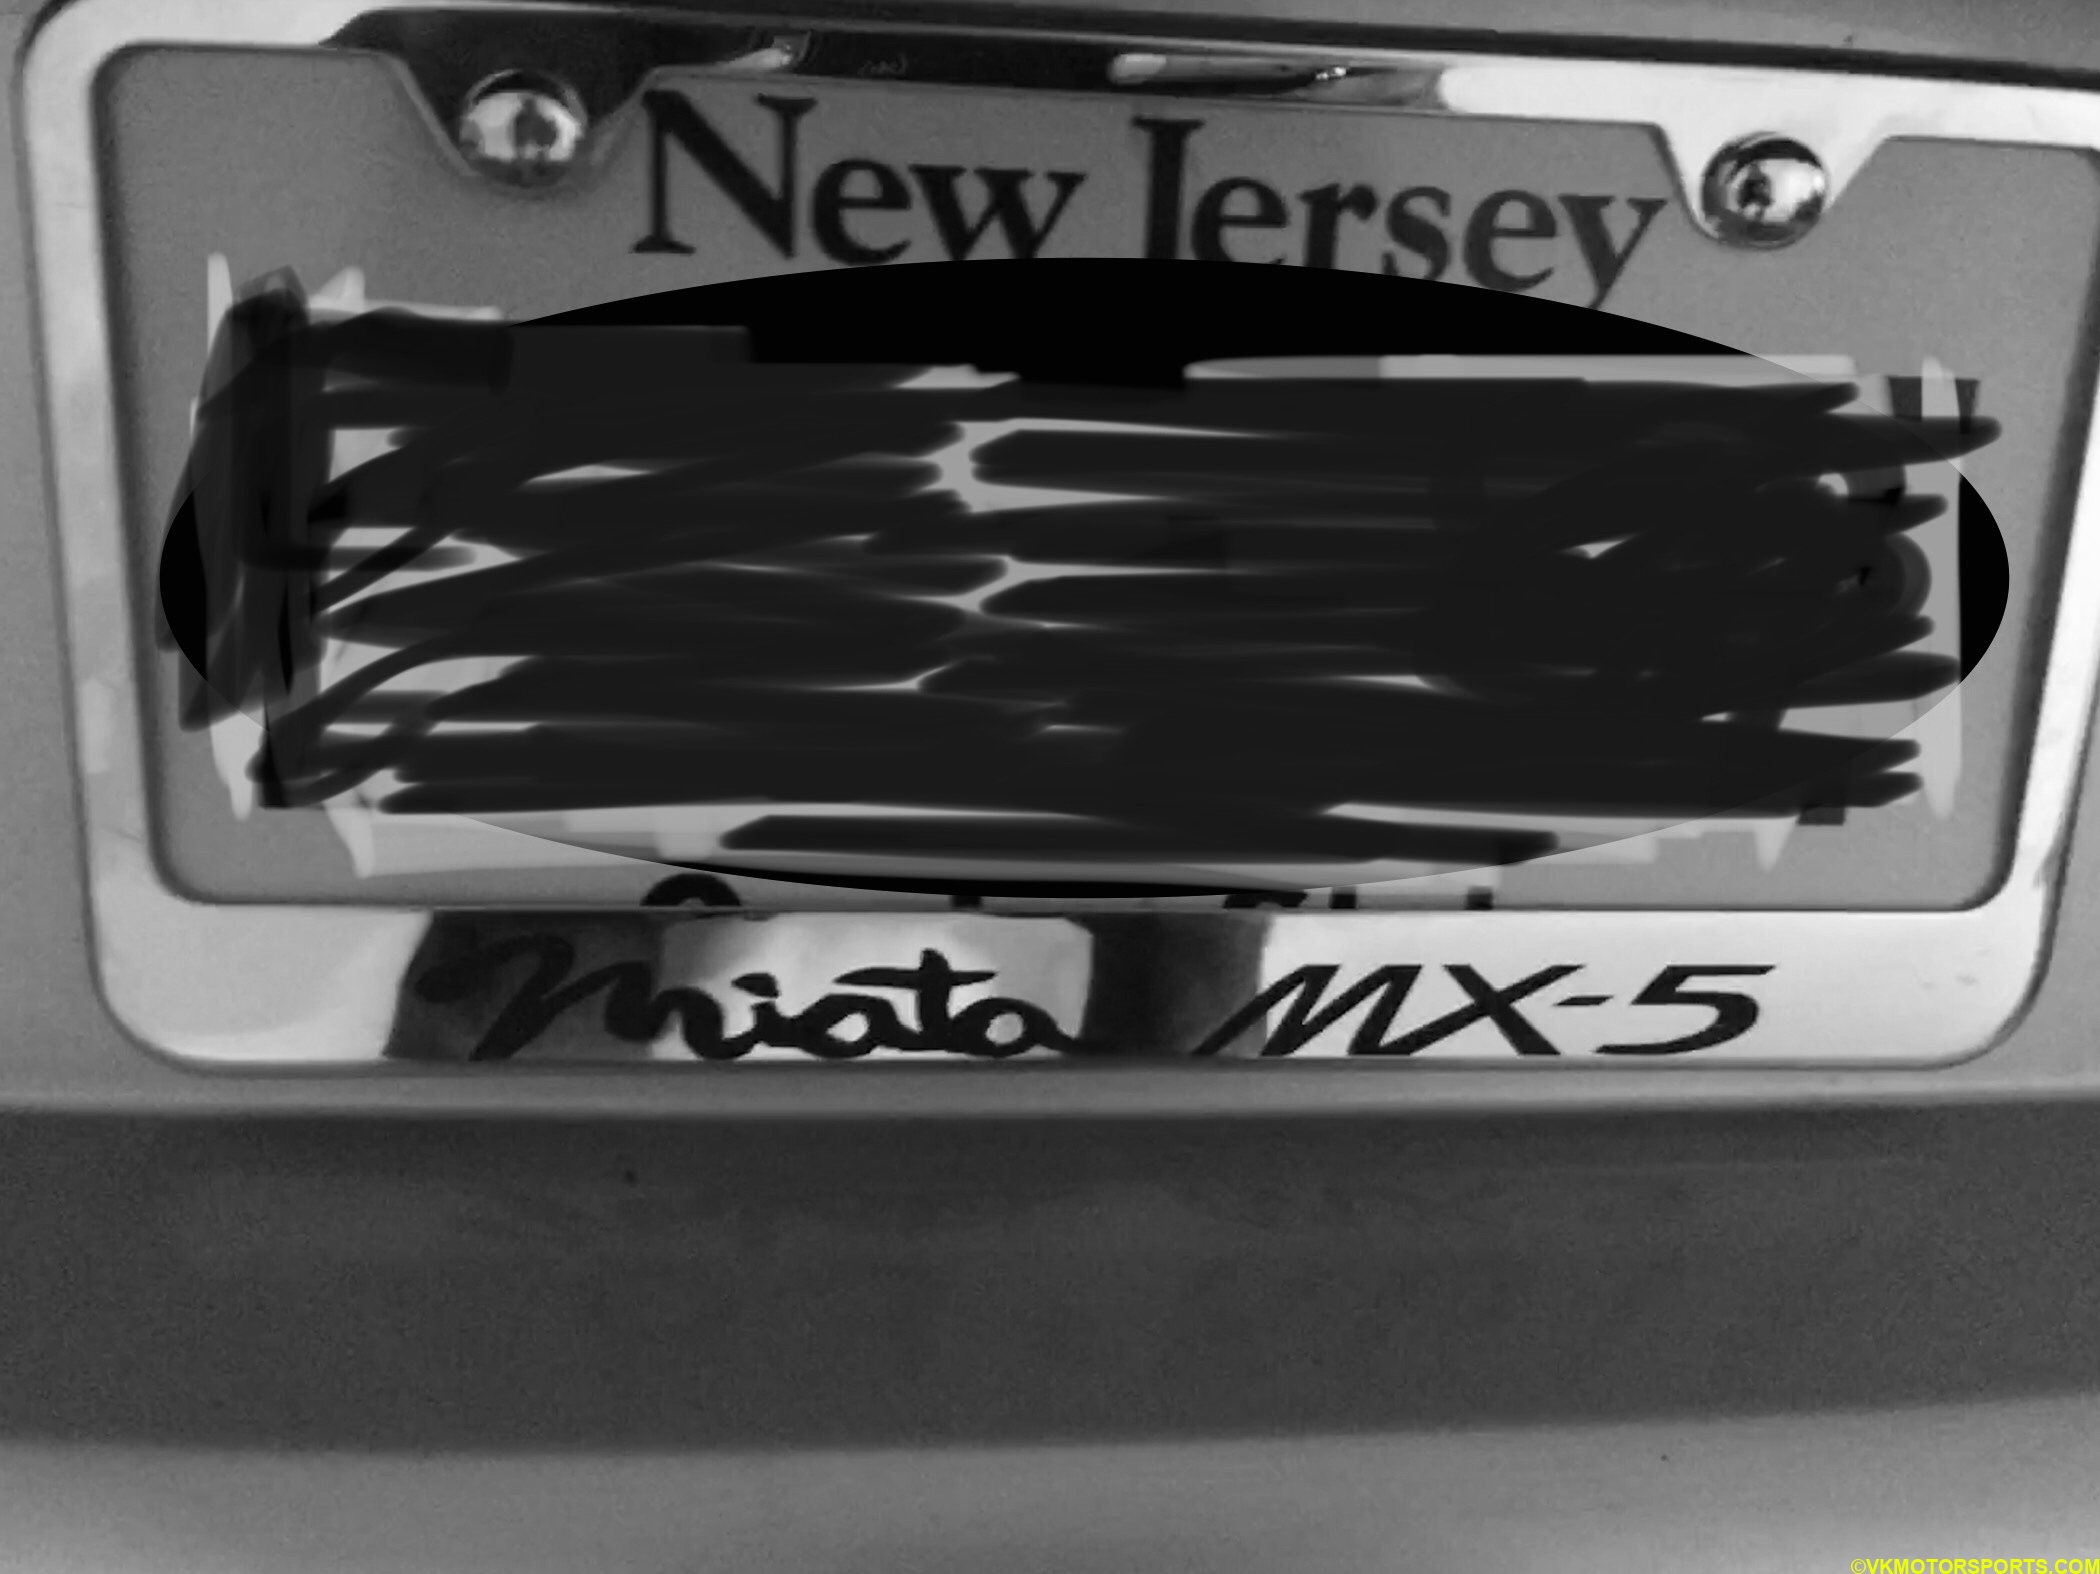 Final look of the rear license plate